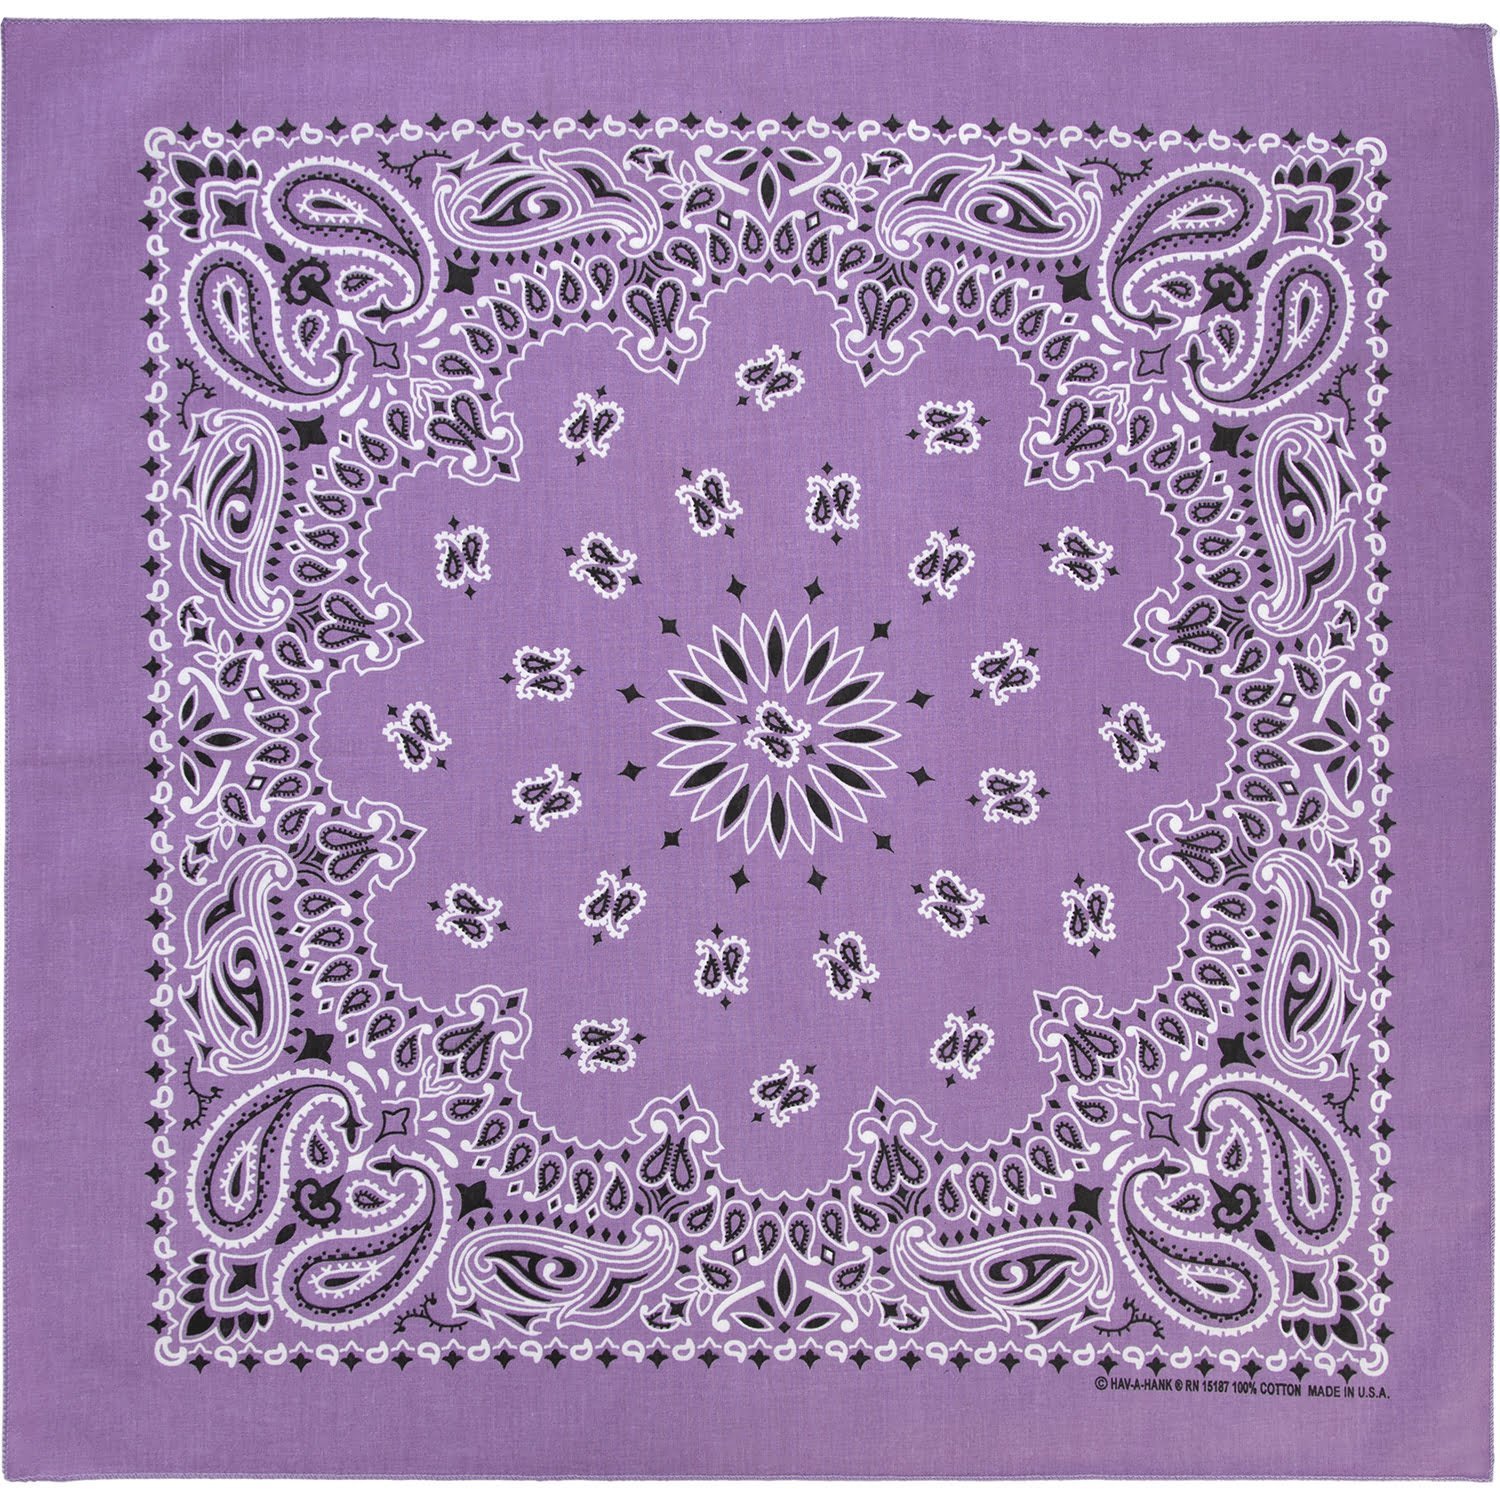 12pcs American Made Lavender Western Paisley Bandanas - Dozen Packed - 100% Cotton - 22x22 Inches